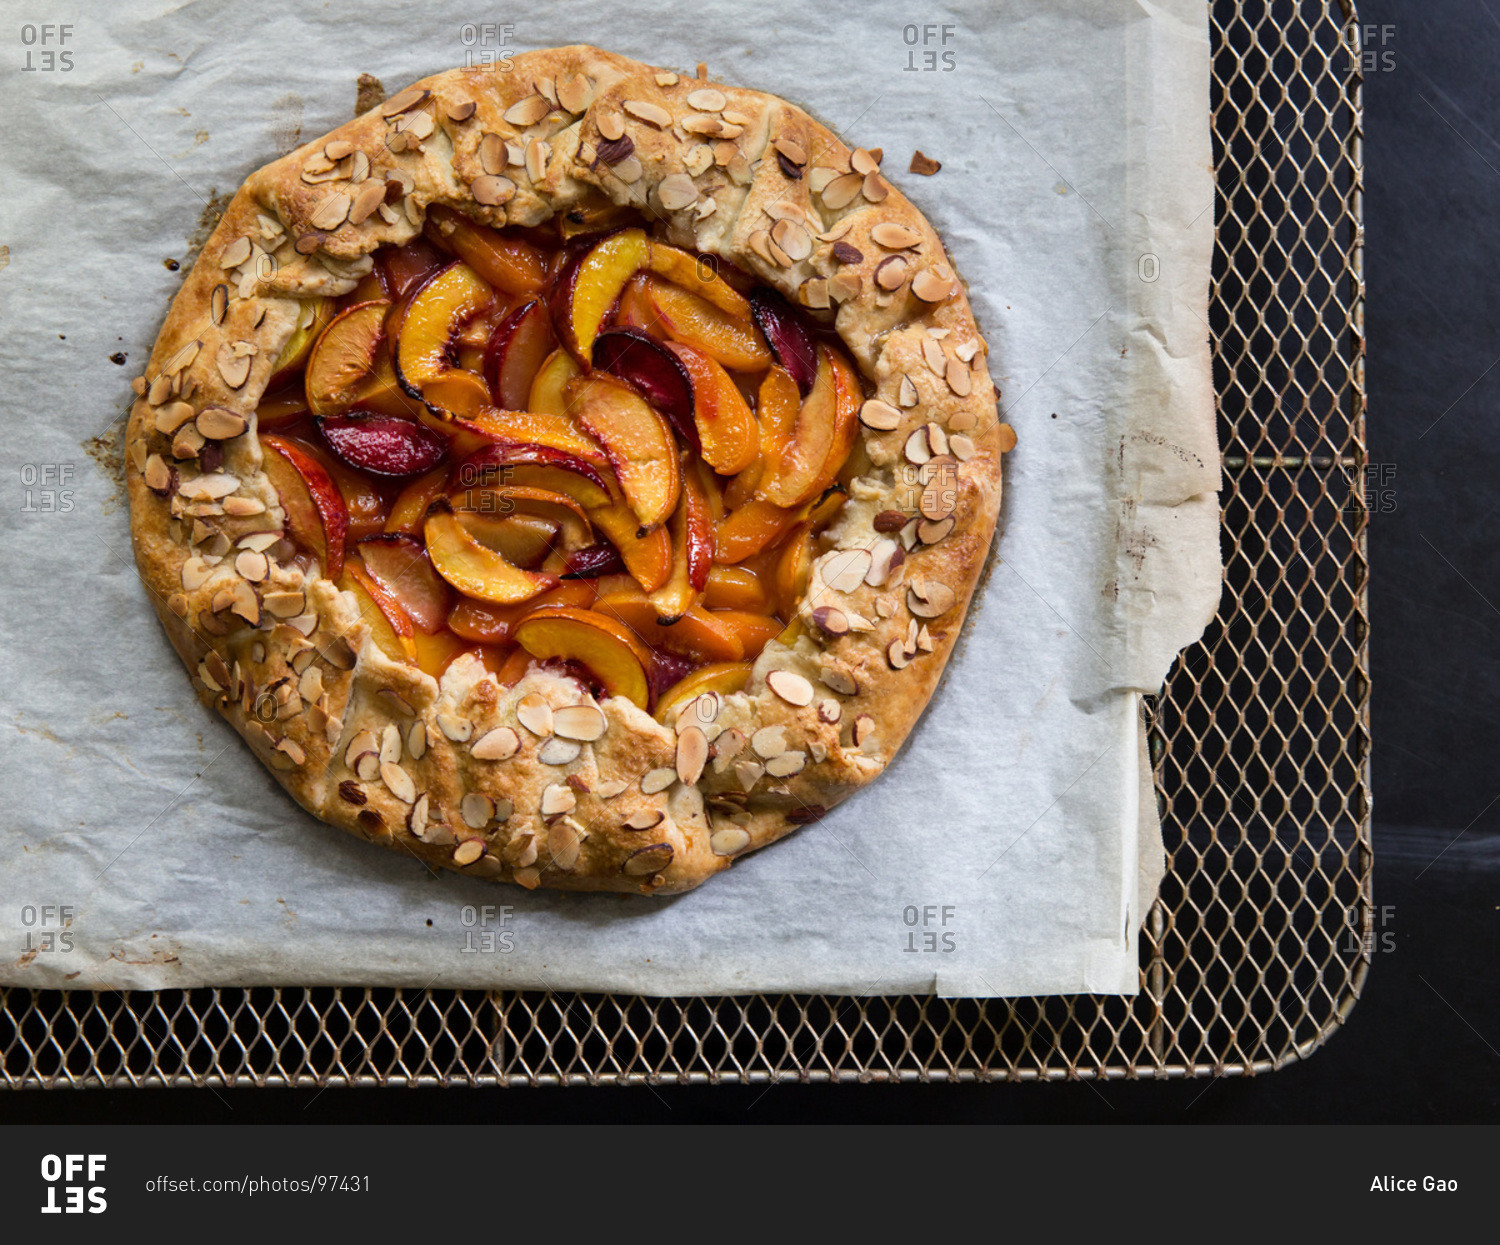 Top view of rustic stone fruit galette with almond flakes